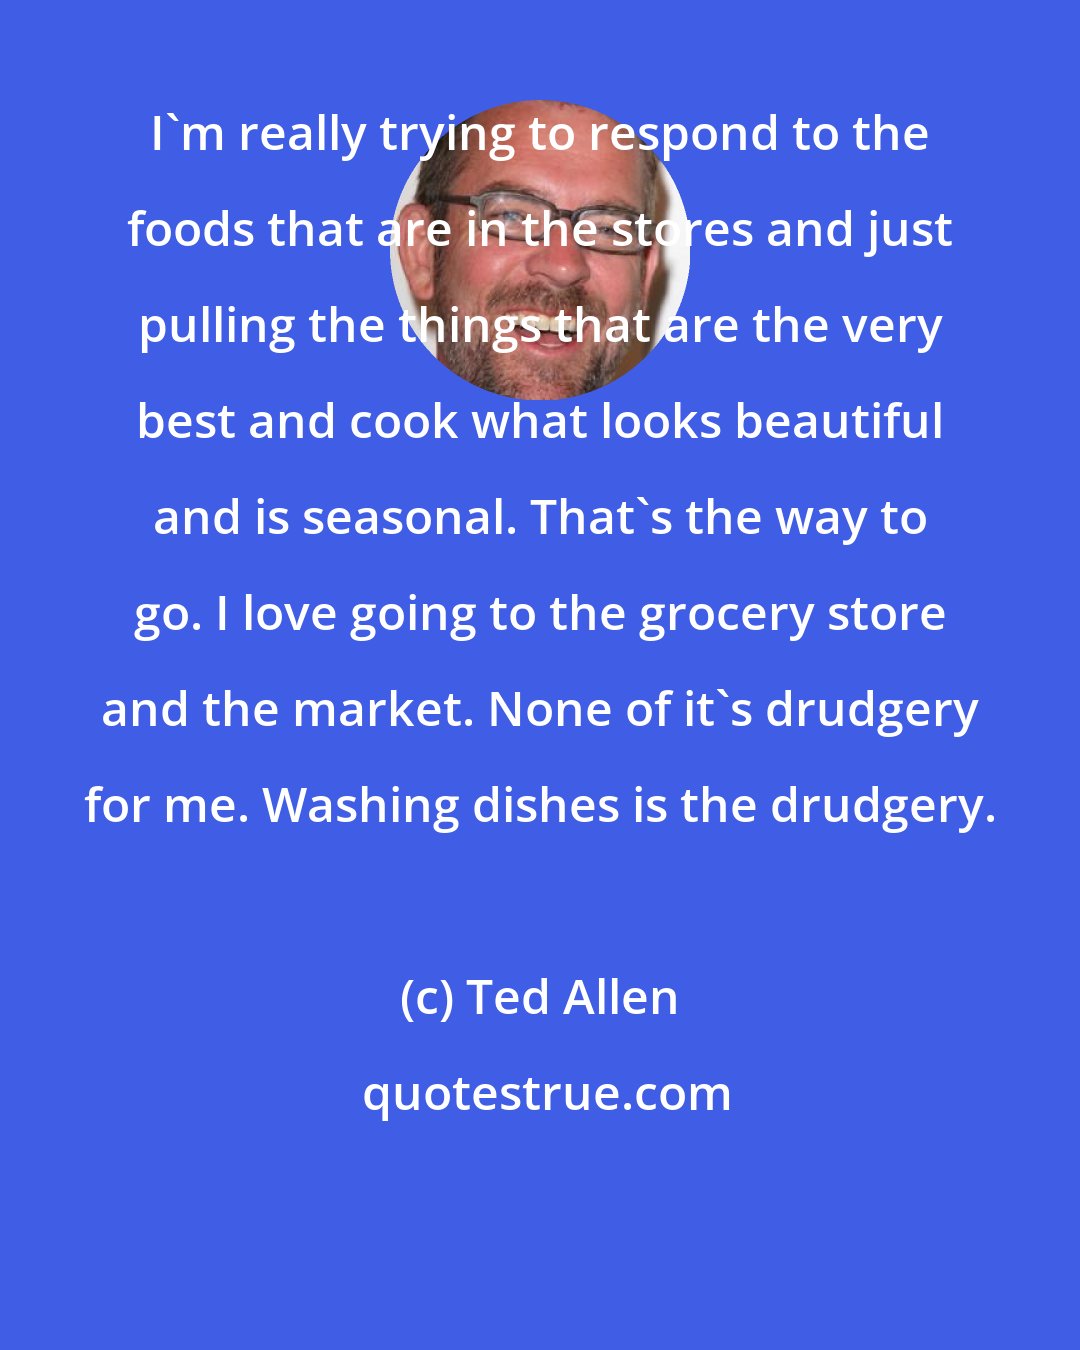 Ted Allen: I'm really trying to respond to the foods that are in the stores and just pulling the things that are the very best and cook what looks beautiful and is seasonal. That's the way to go. I love going to the grocery store and the market. None of it's drudgery for me. Washing dishes is the drudgery.